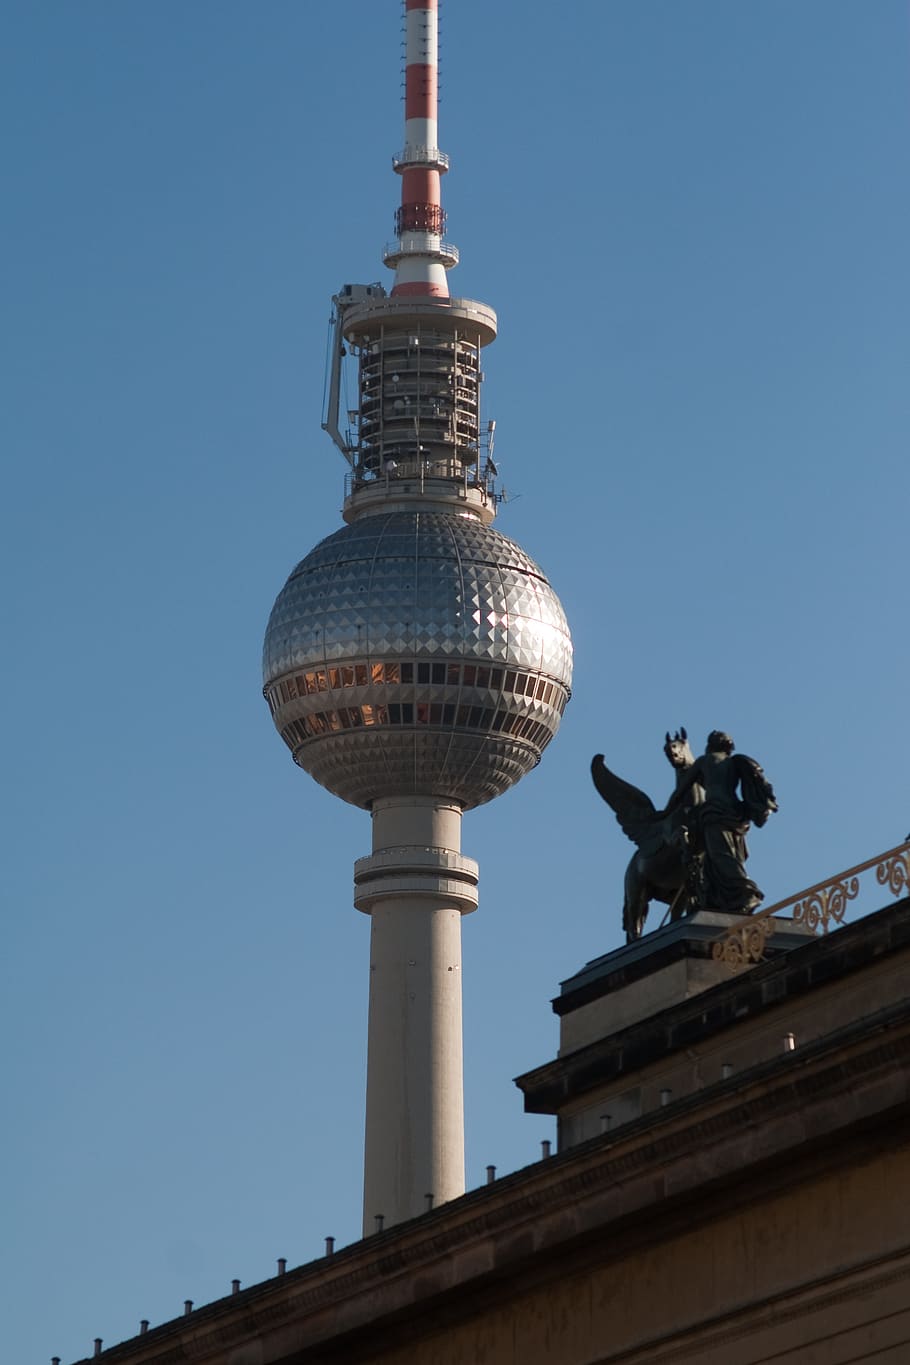 hotels in berlin, germany, tv tower, nearby, statue, architecture, HD wallpaper